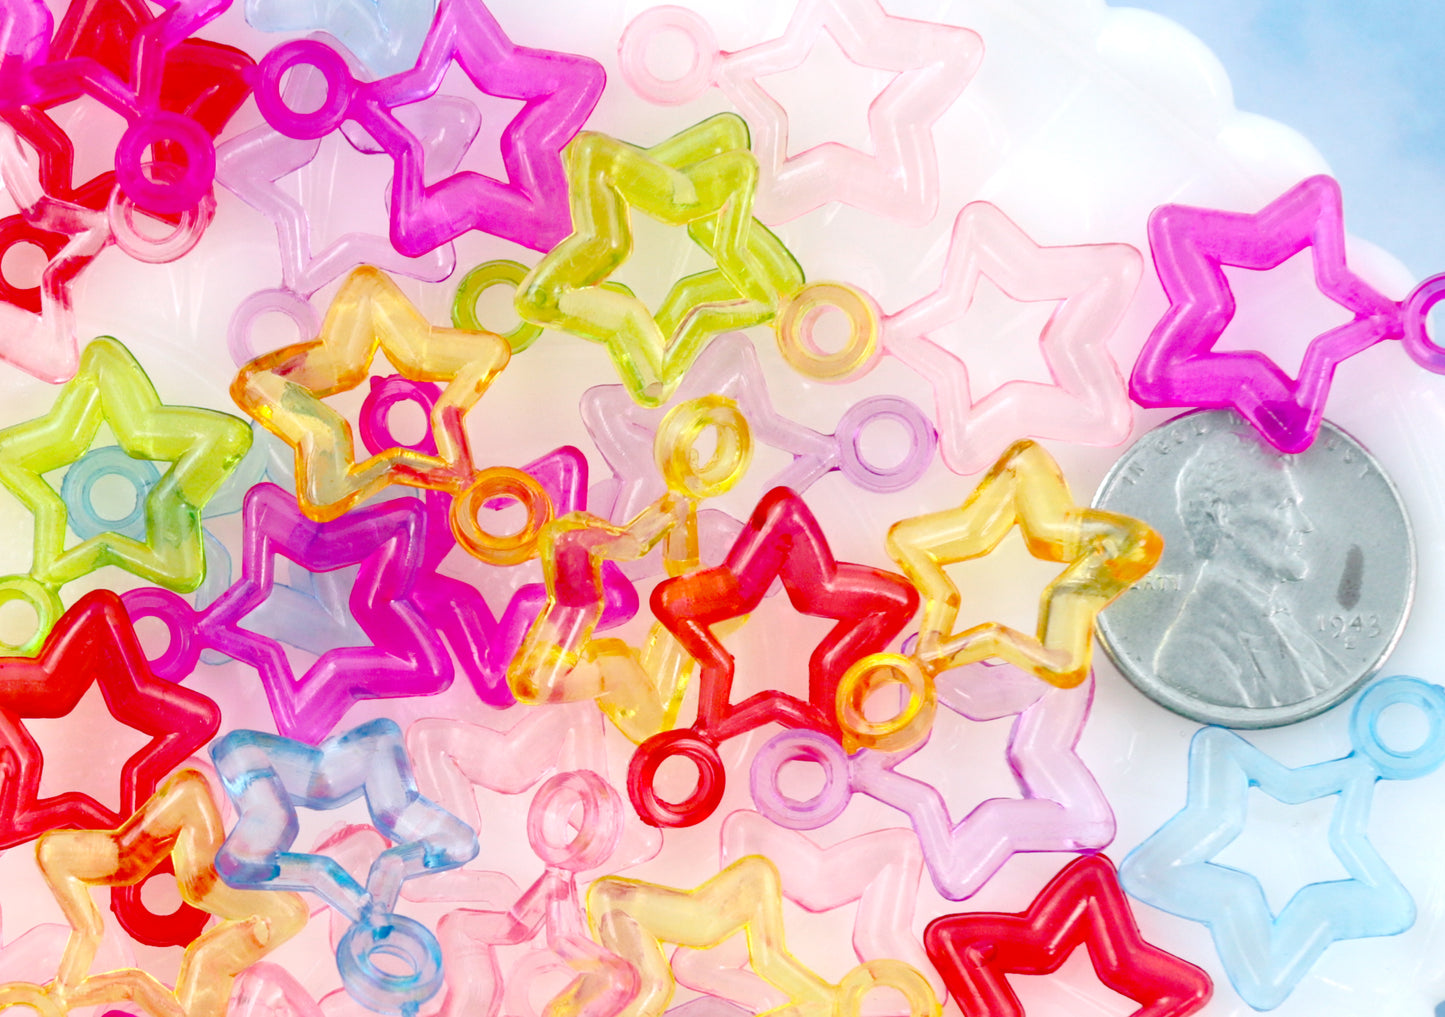 Plastic Star Charms - 20mm Transparent Star Outline Plastic or Acrylic Charms or Pendants - 100 pc set